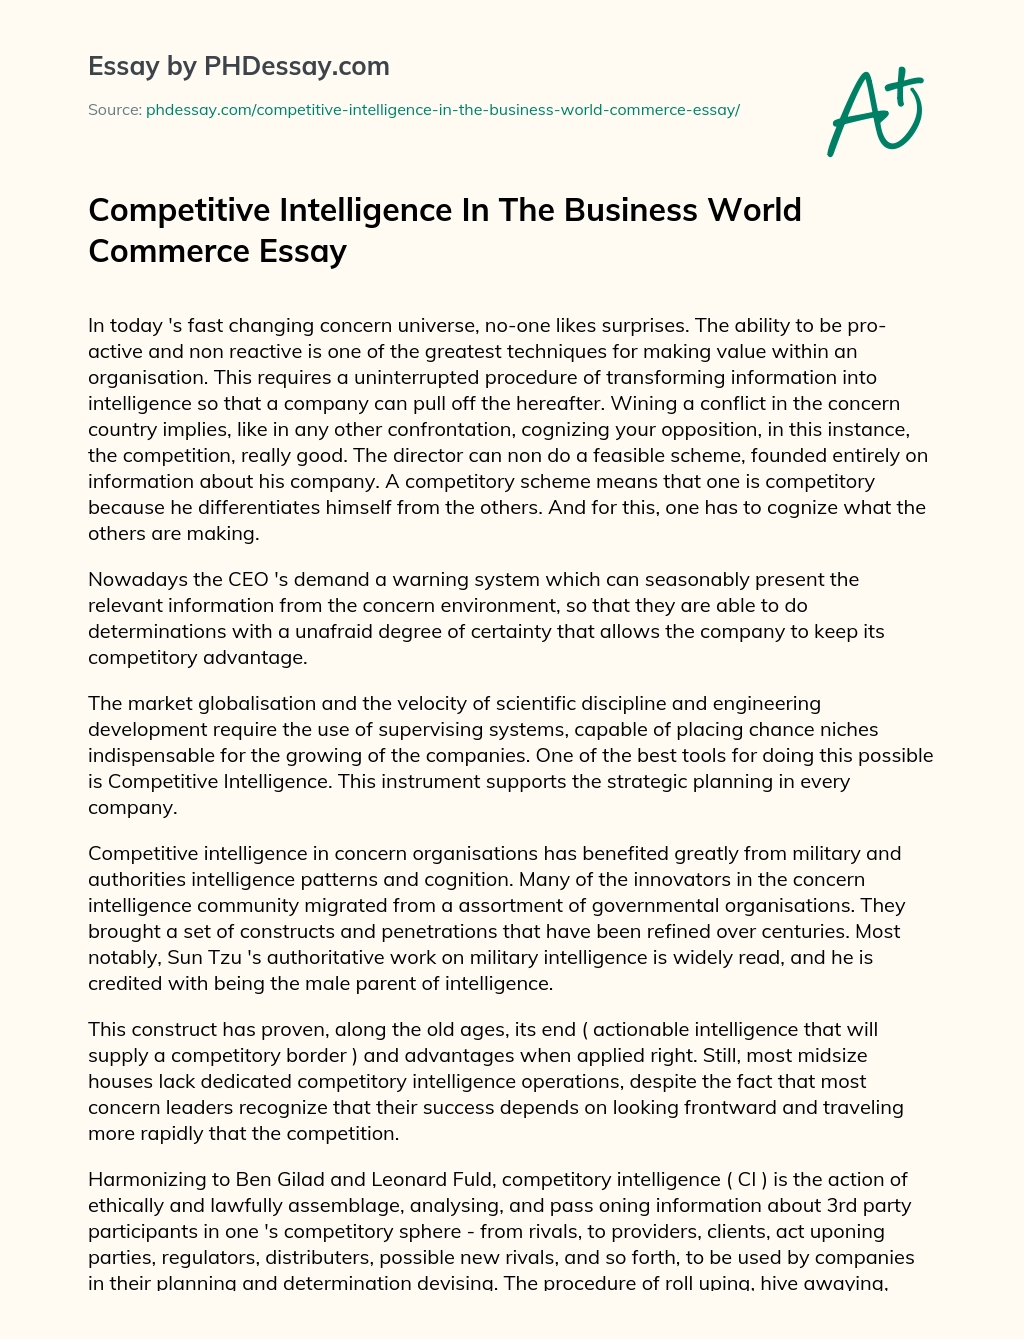 Competitive Intelligence In The Business World Commerce Essay essay